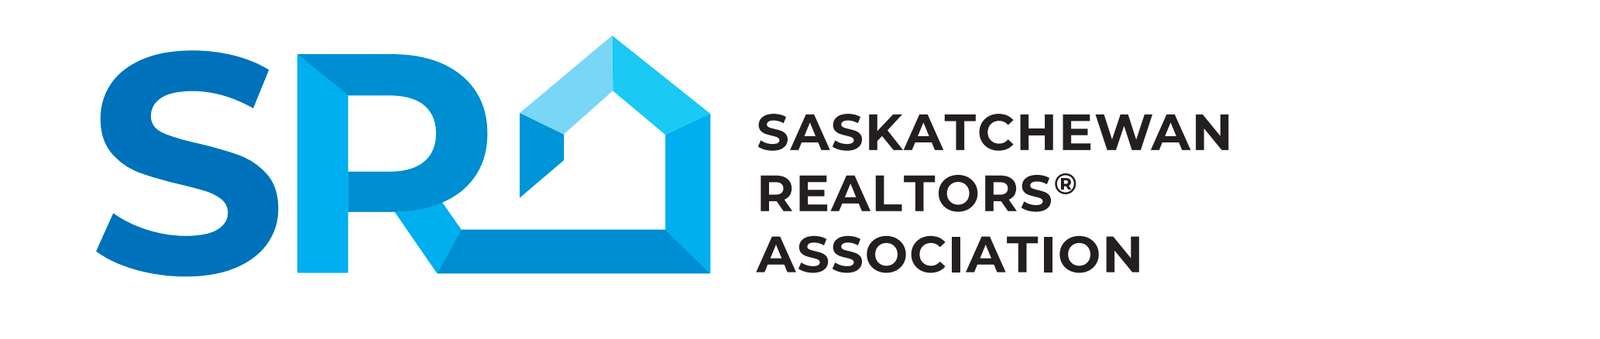 Saskatoon home sales show year-over-year gains for 6th consecutive months: SRA